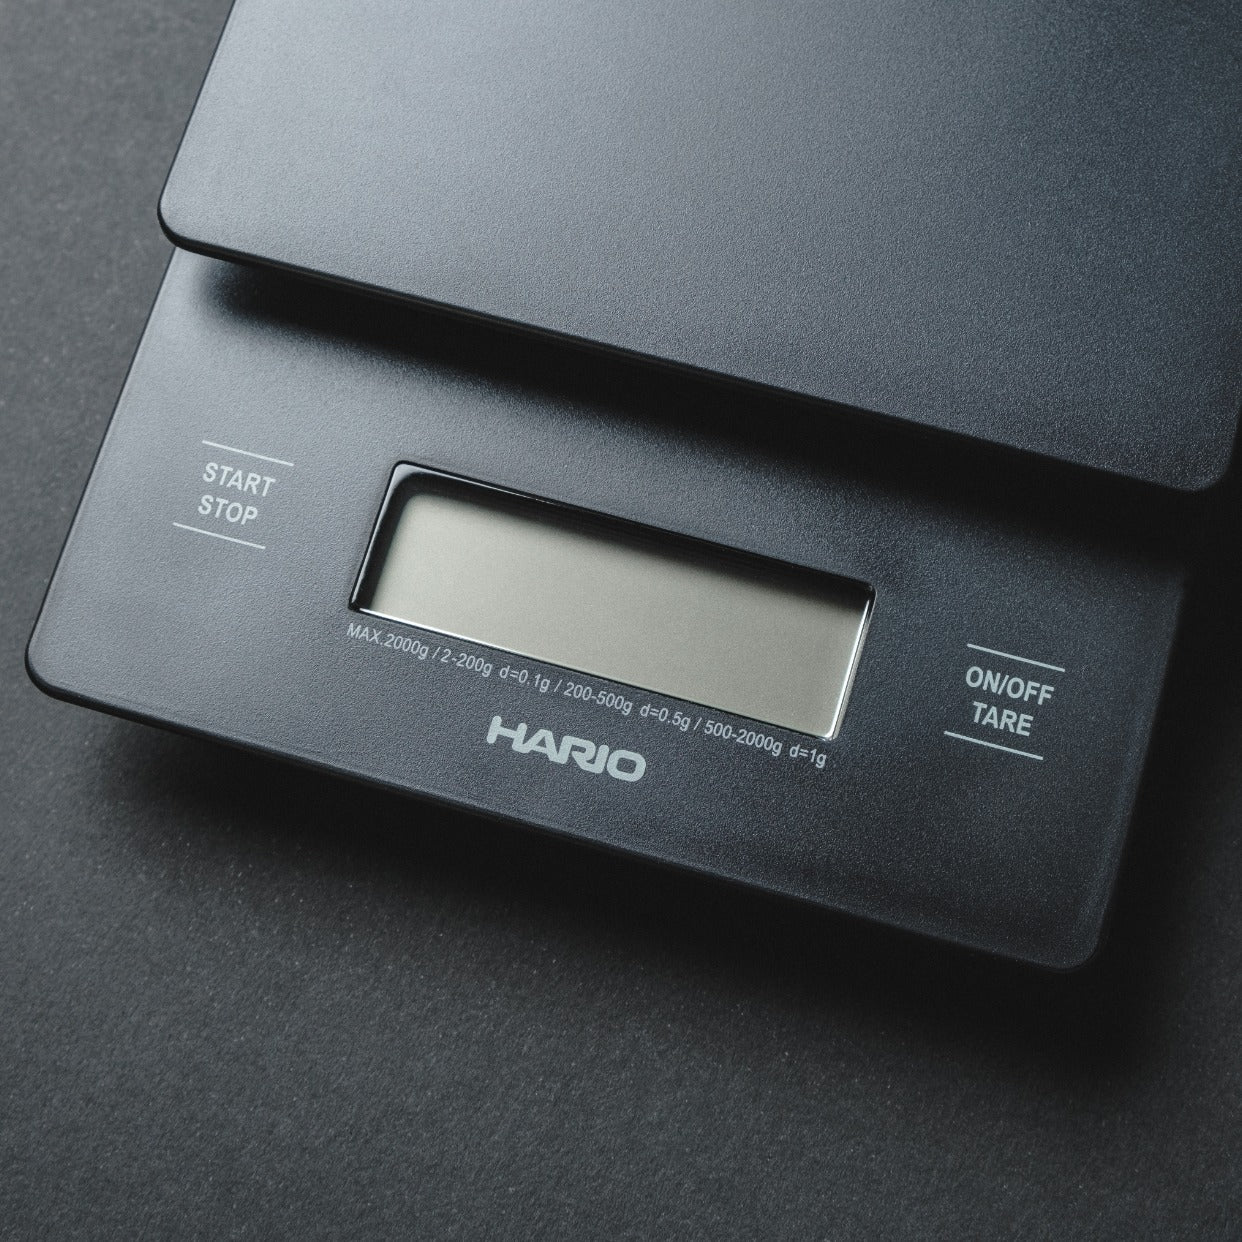 Hario V60 Drip Scales Basic Barista Australia Melbourne Weigh coffee Brewing scales coffee brew scale set of scales lightweight travel coffee bar brew bar Australia Barista Scales scale